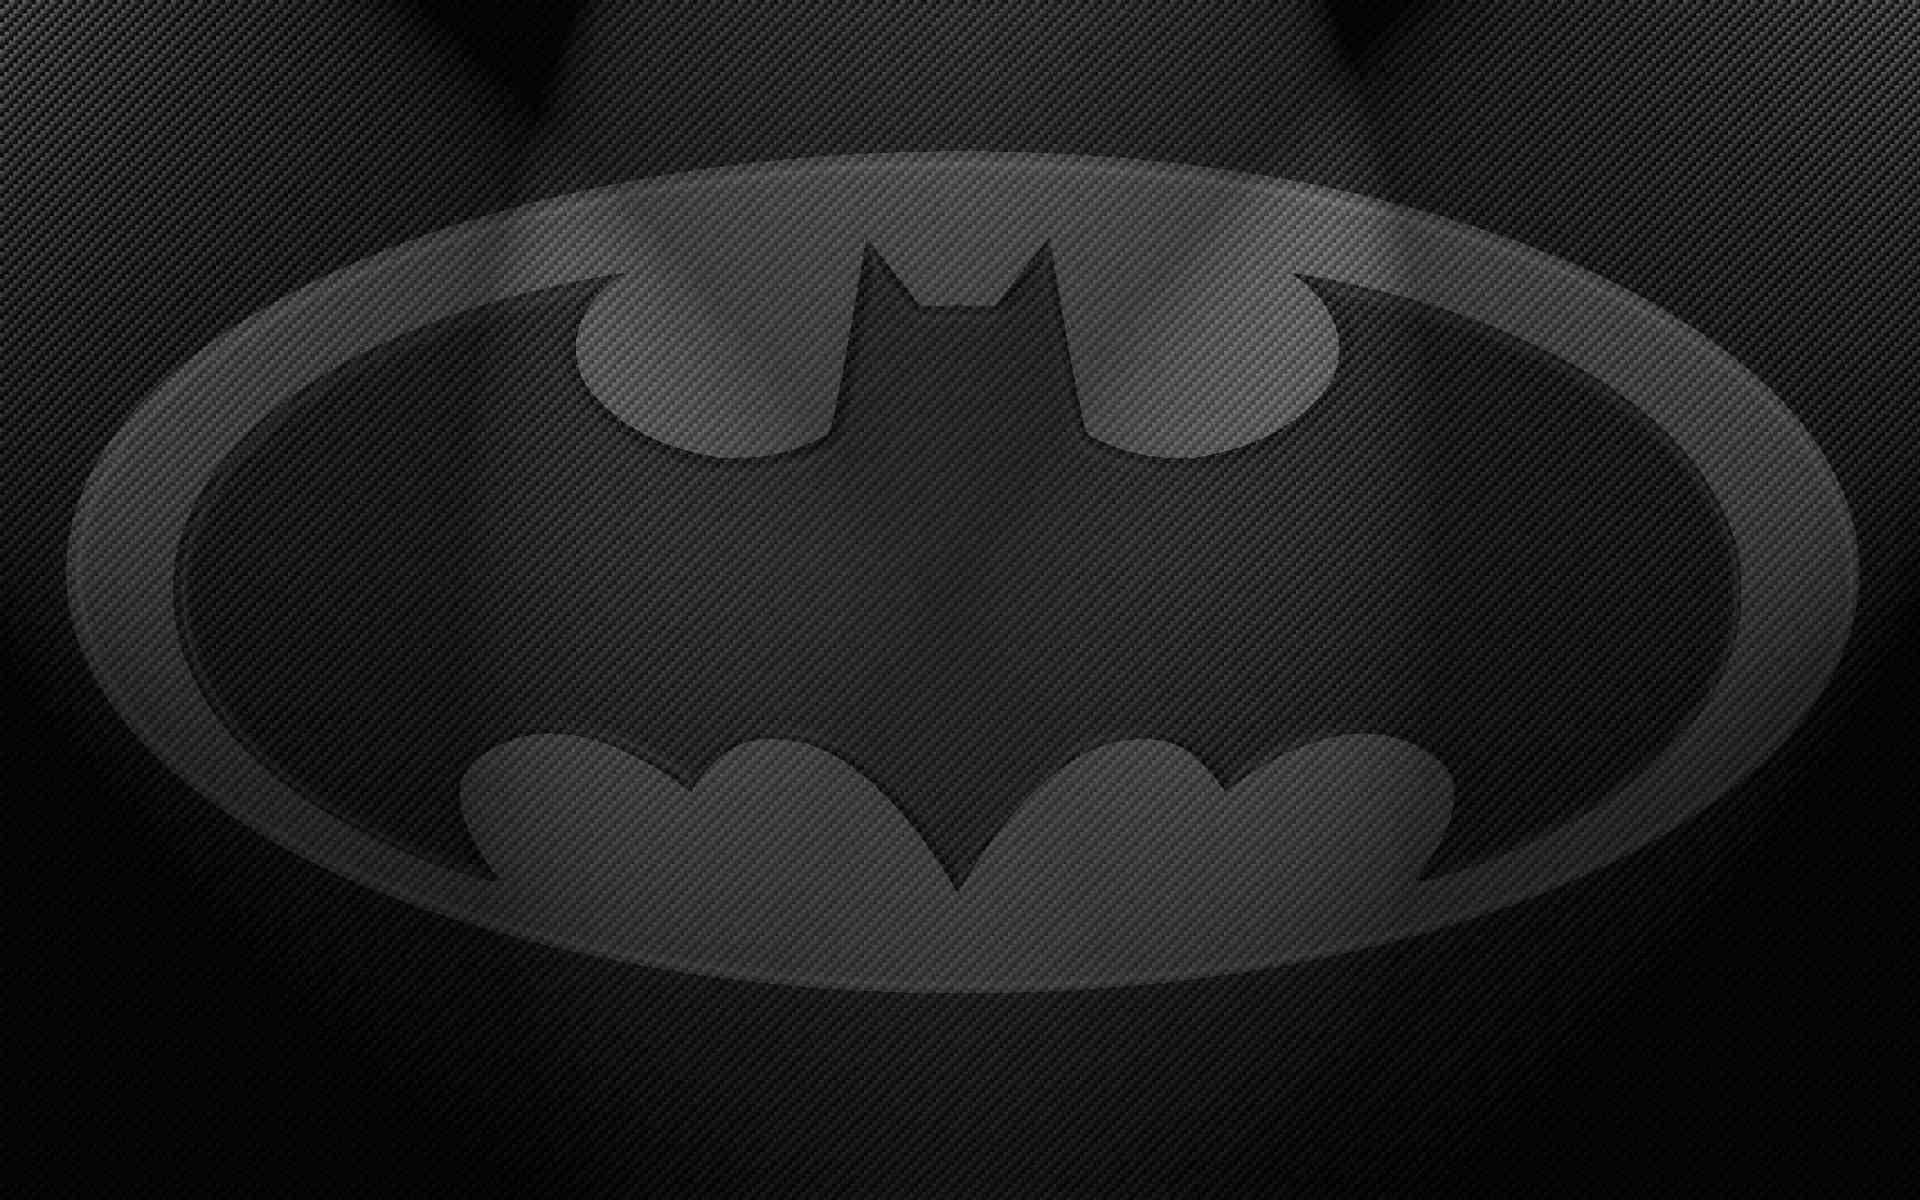 Batman Logo wallpapers for desktop, download free Batman Logo pictures and  backgrounds for PC